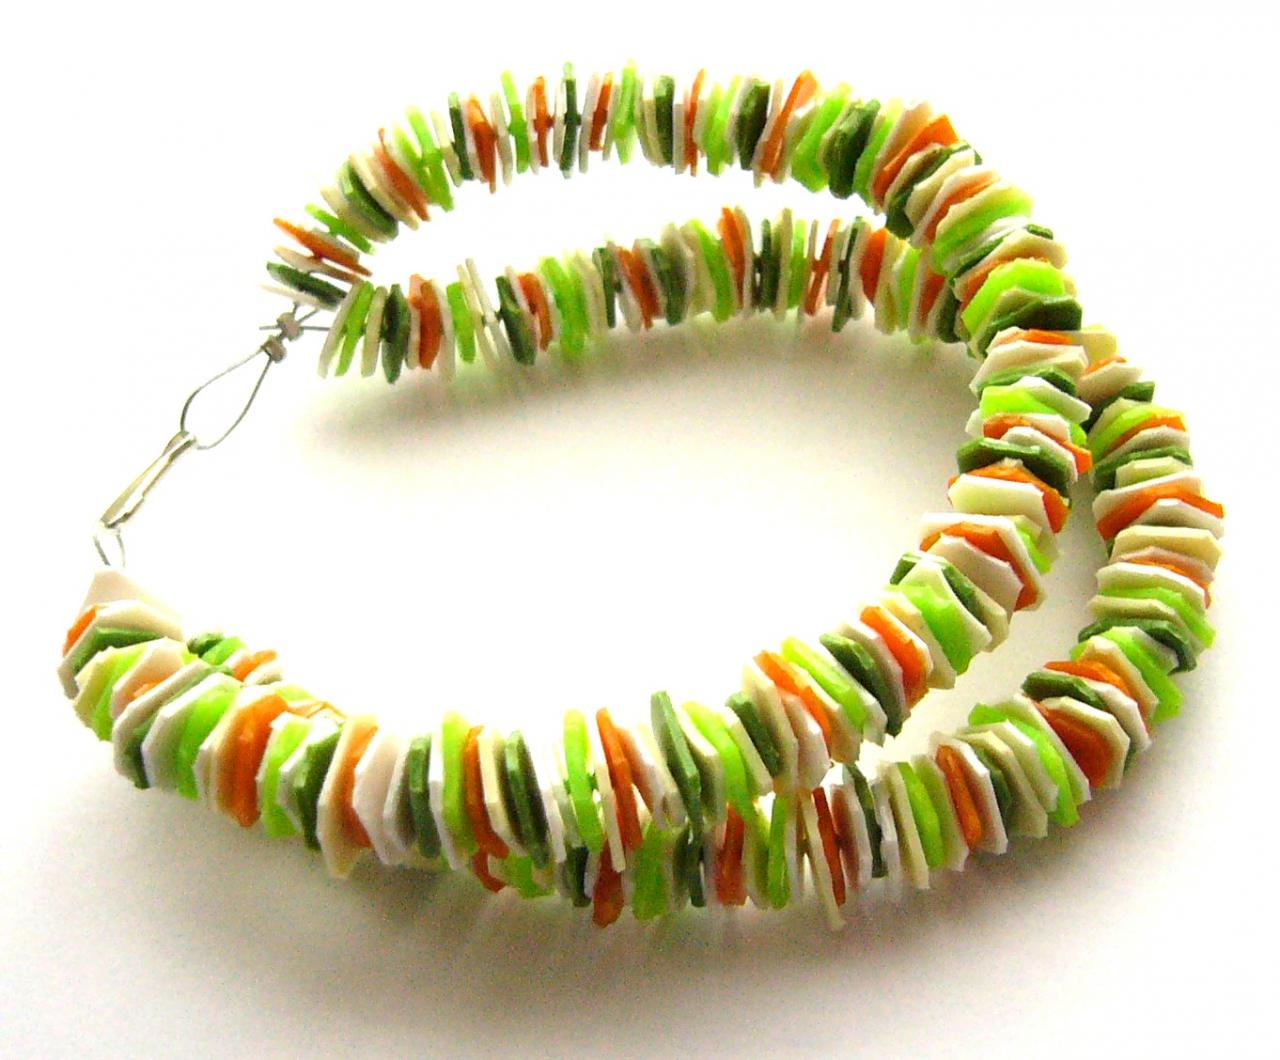 Colorful Eco-friendly Bracelet Made Of Recycled Plastic Bottles - Upcycled Jewelry, Bright, Modern, Handmade